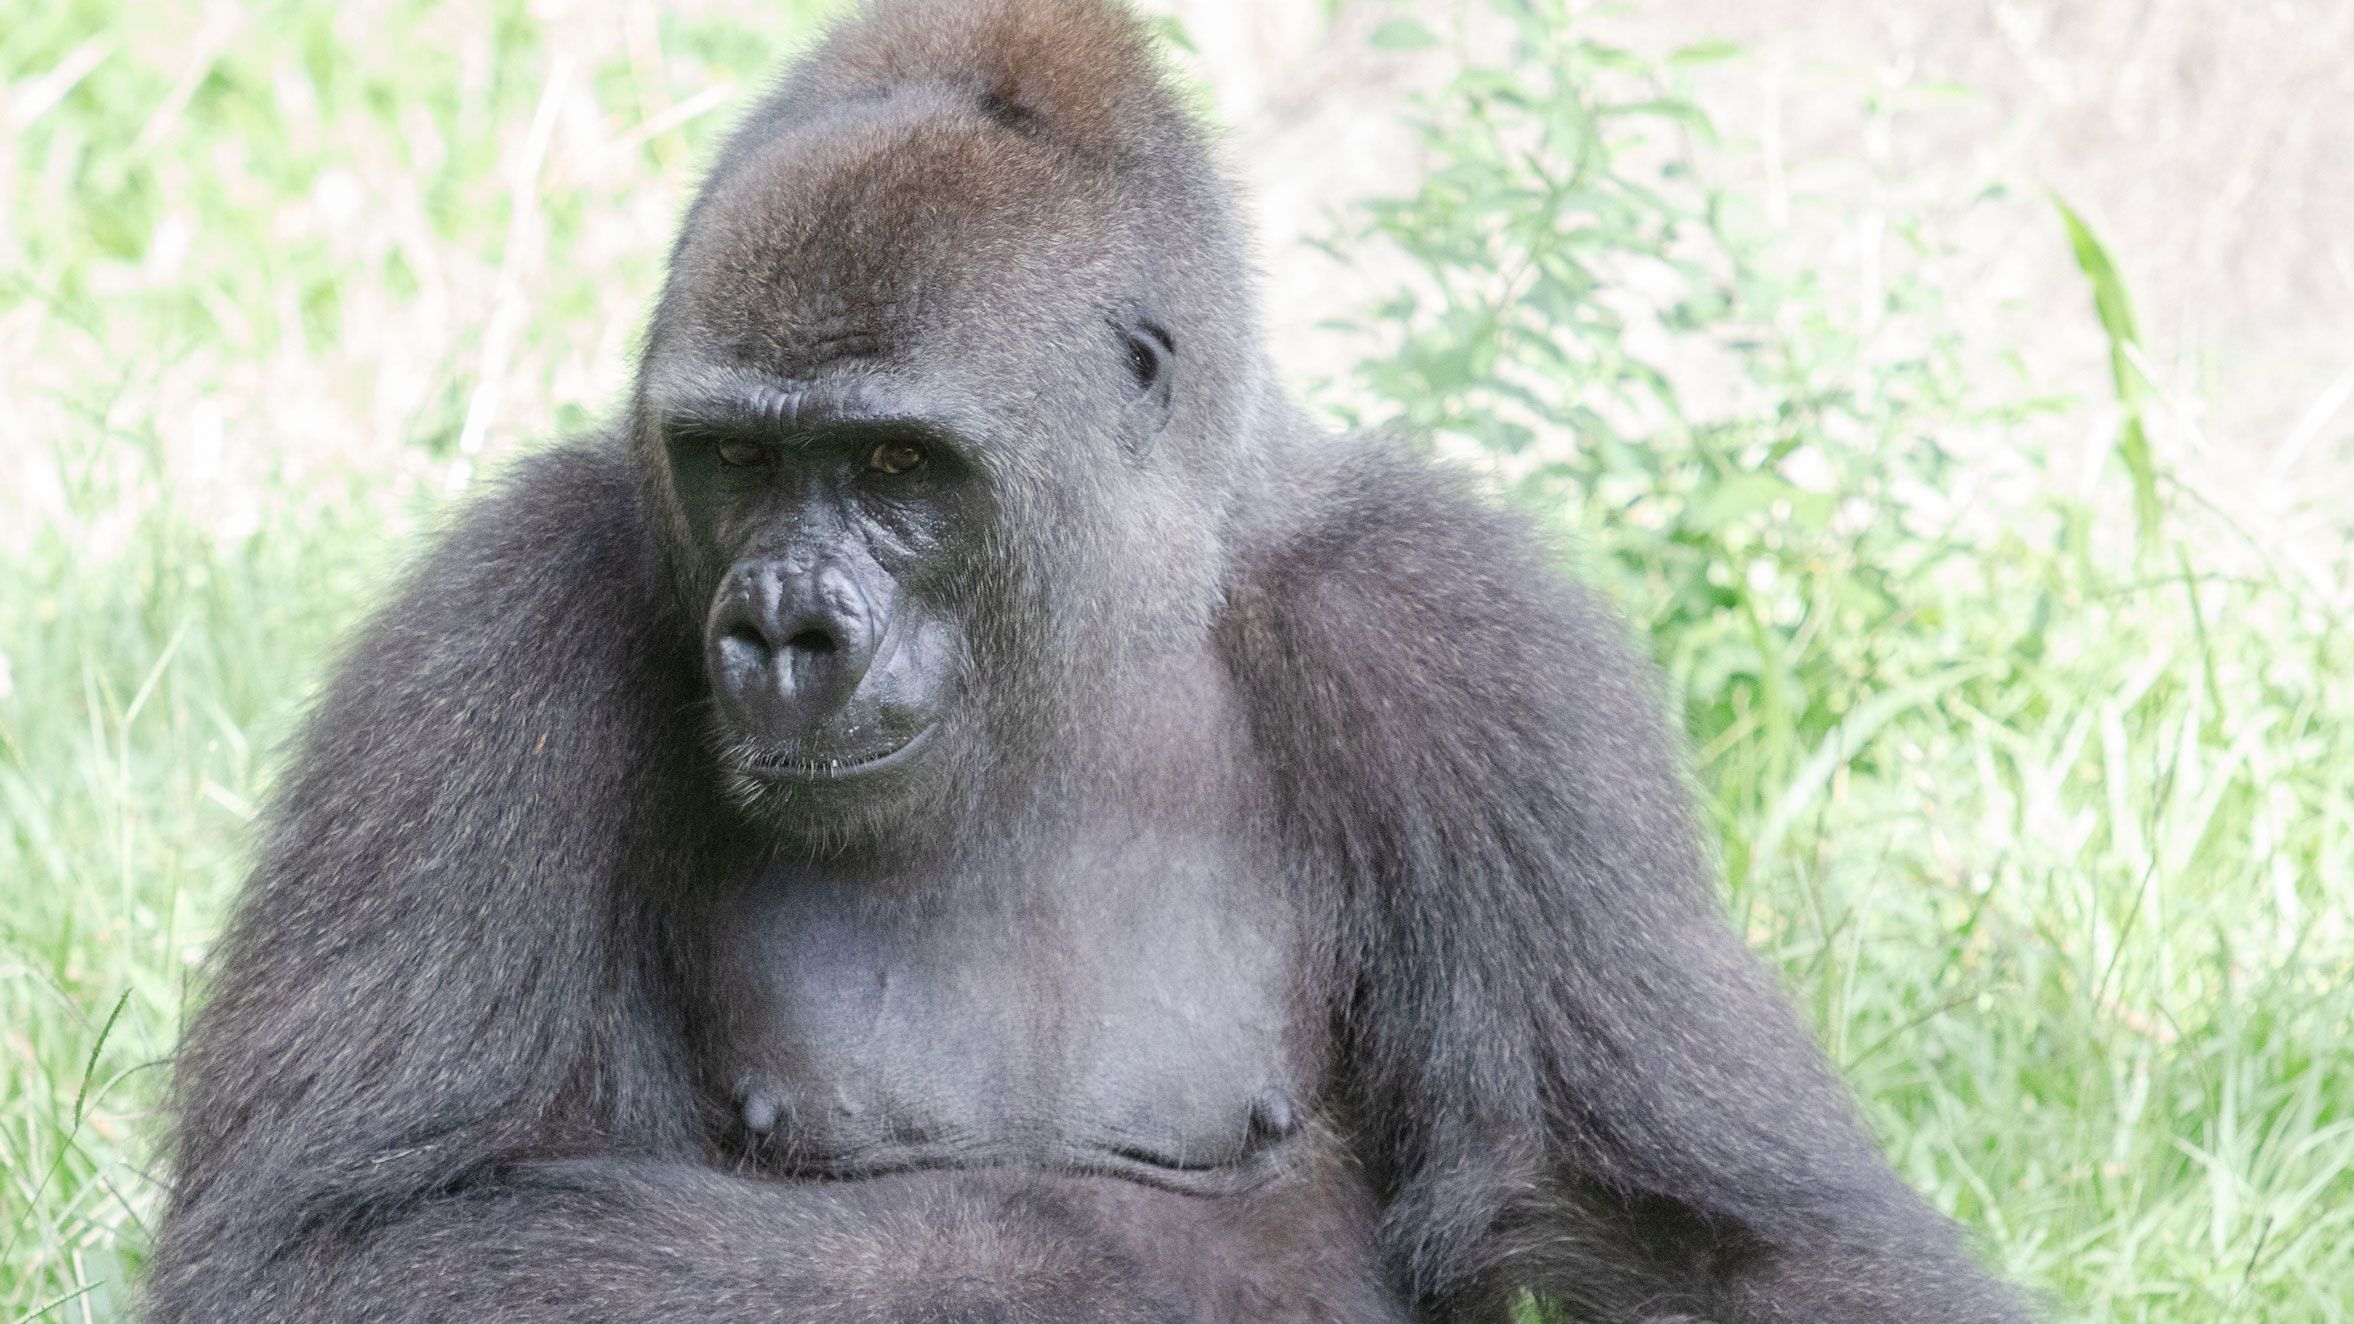 A critically endangered gorilla is about to be a mom, and she's